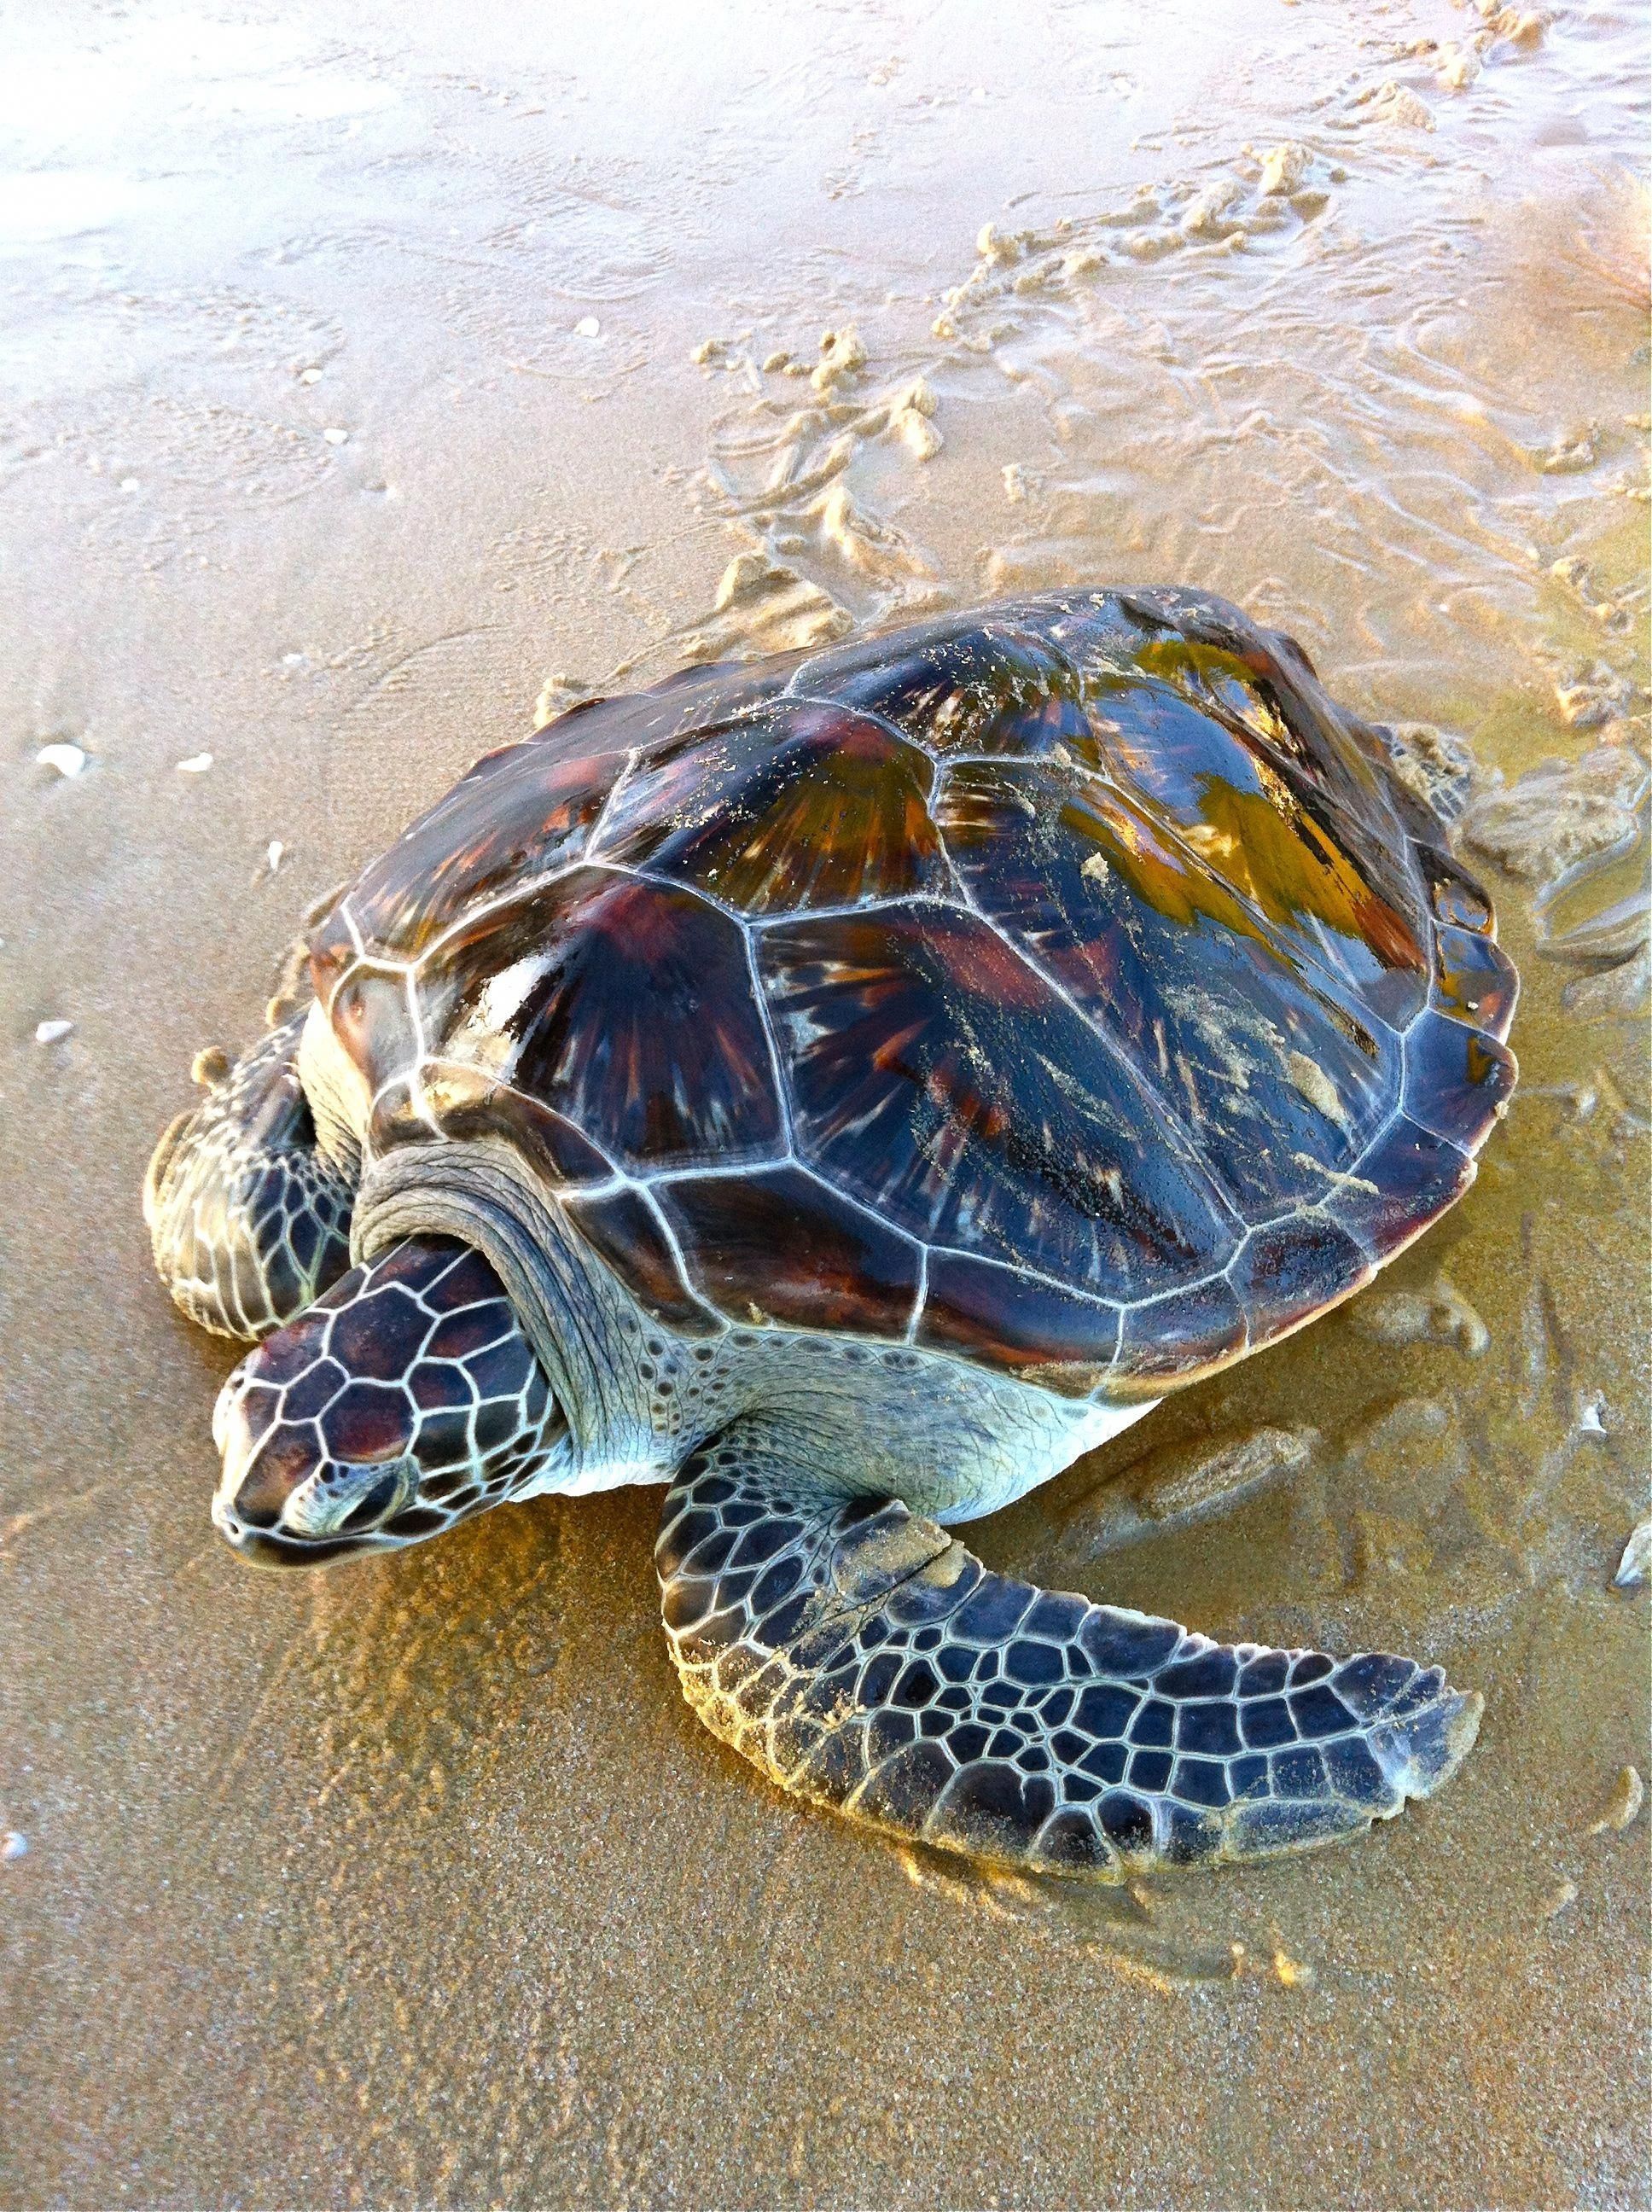 A turtle is laying on the beach - Turtle